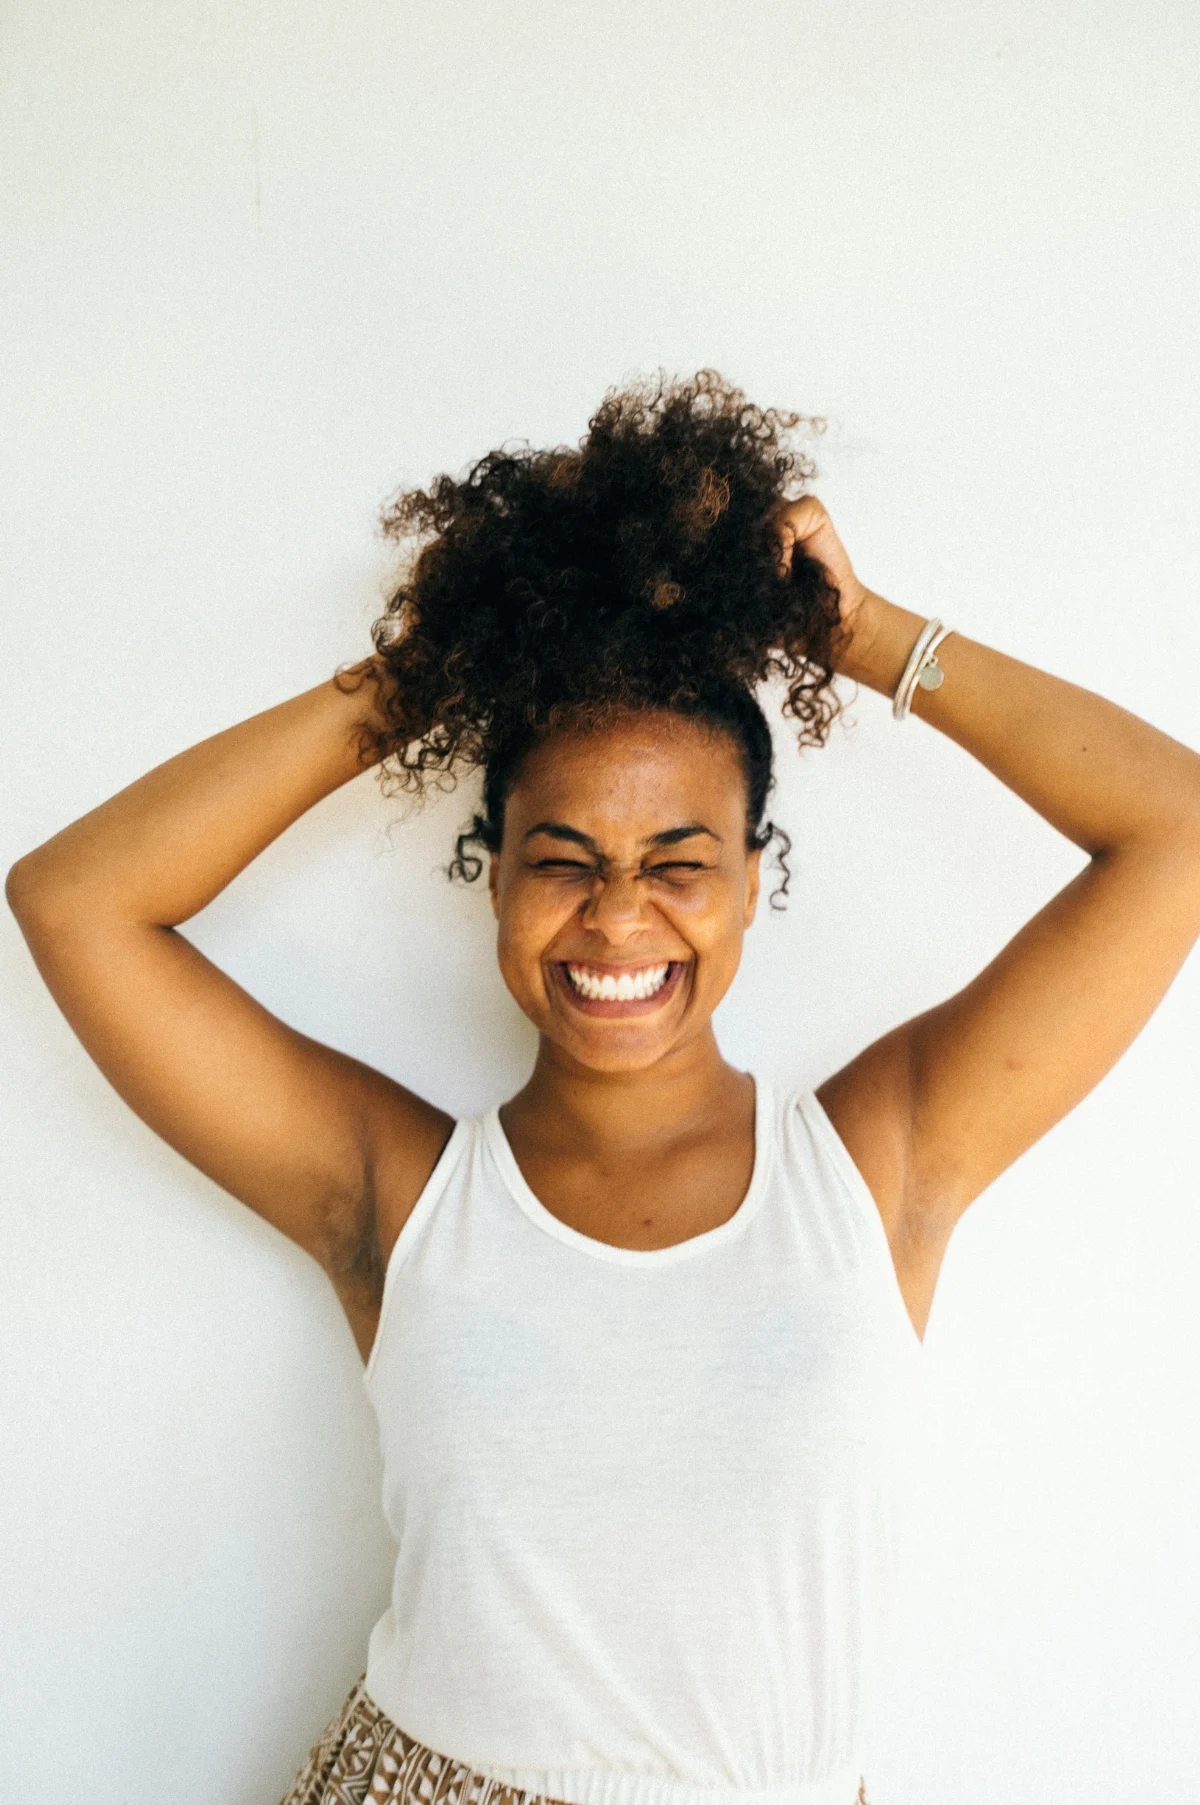 What does it truly mean to be a confident woman? Not a woman that just looks confident on the outside, but one that is actually confident on the inside. Here are 15 signs of a truly confident woman that you can adopt today.